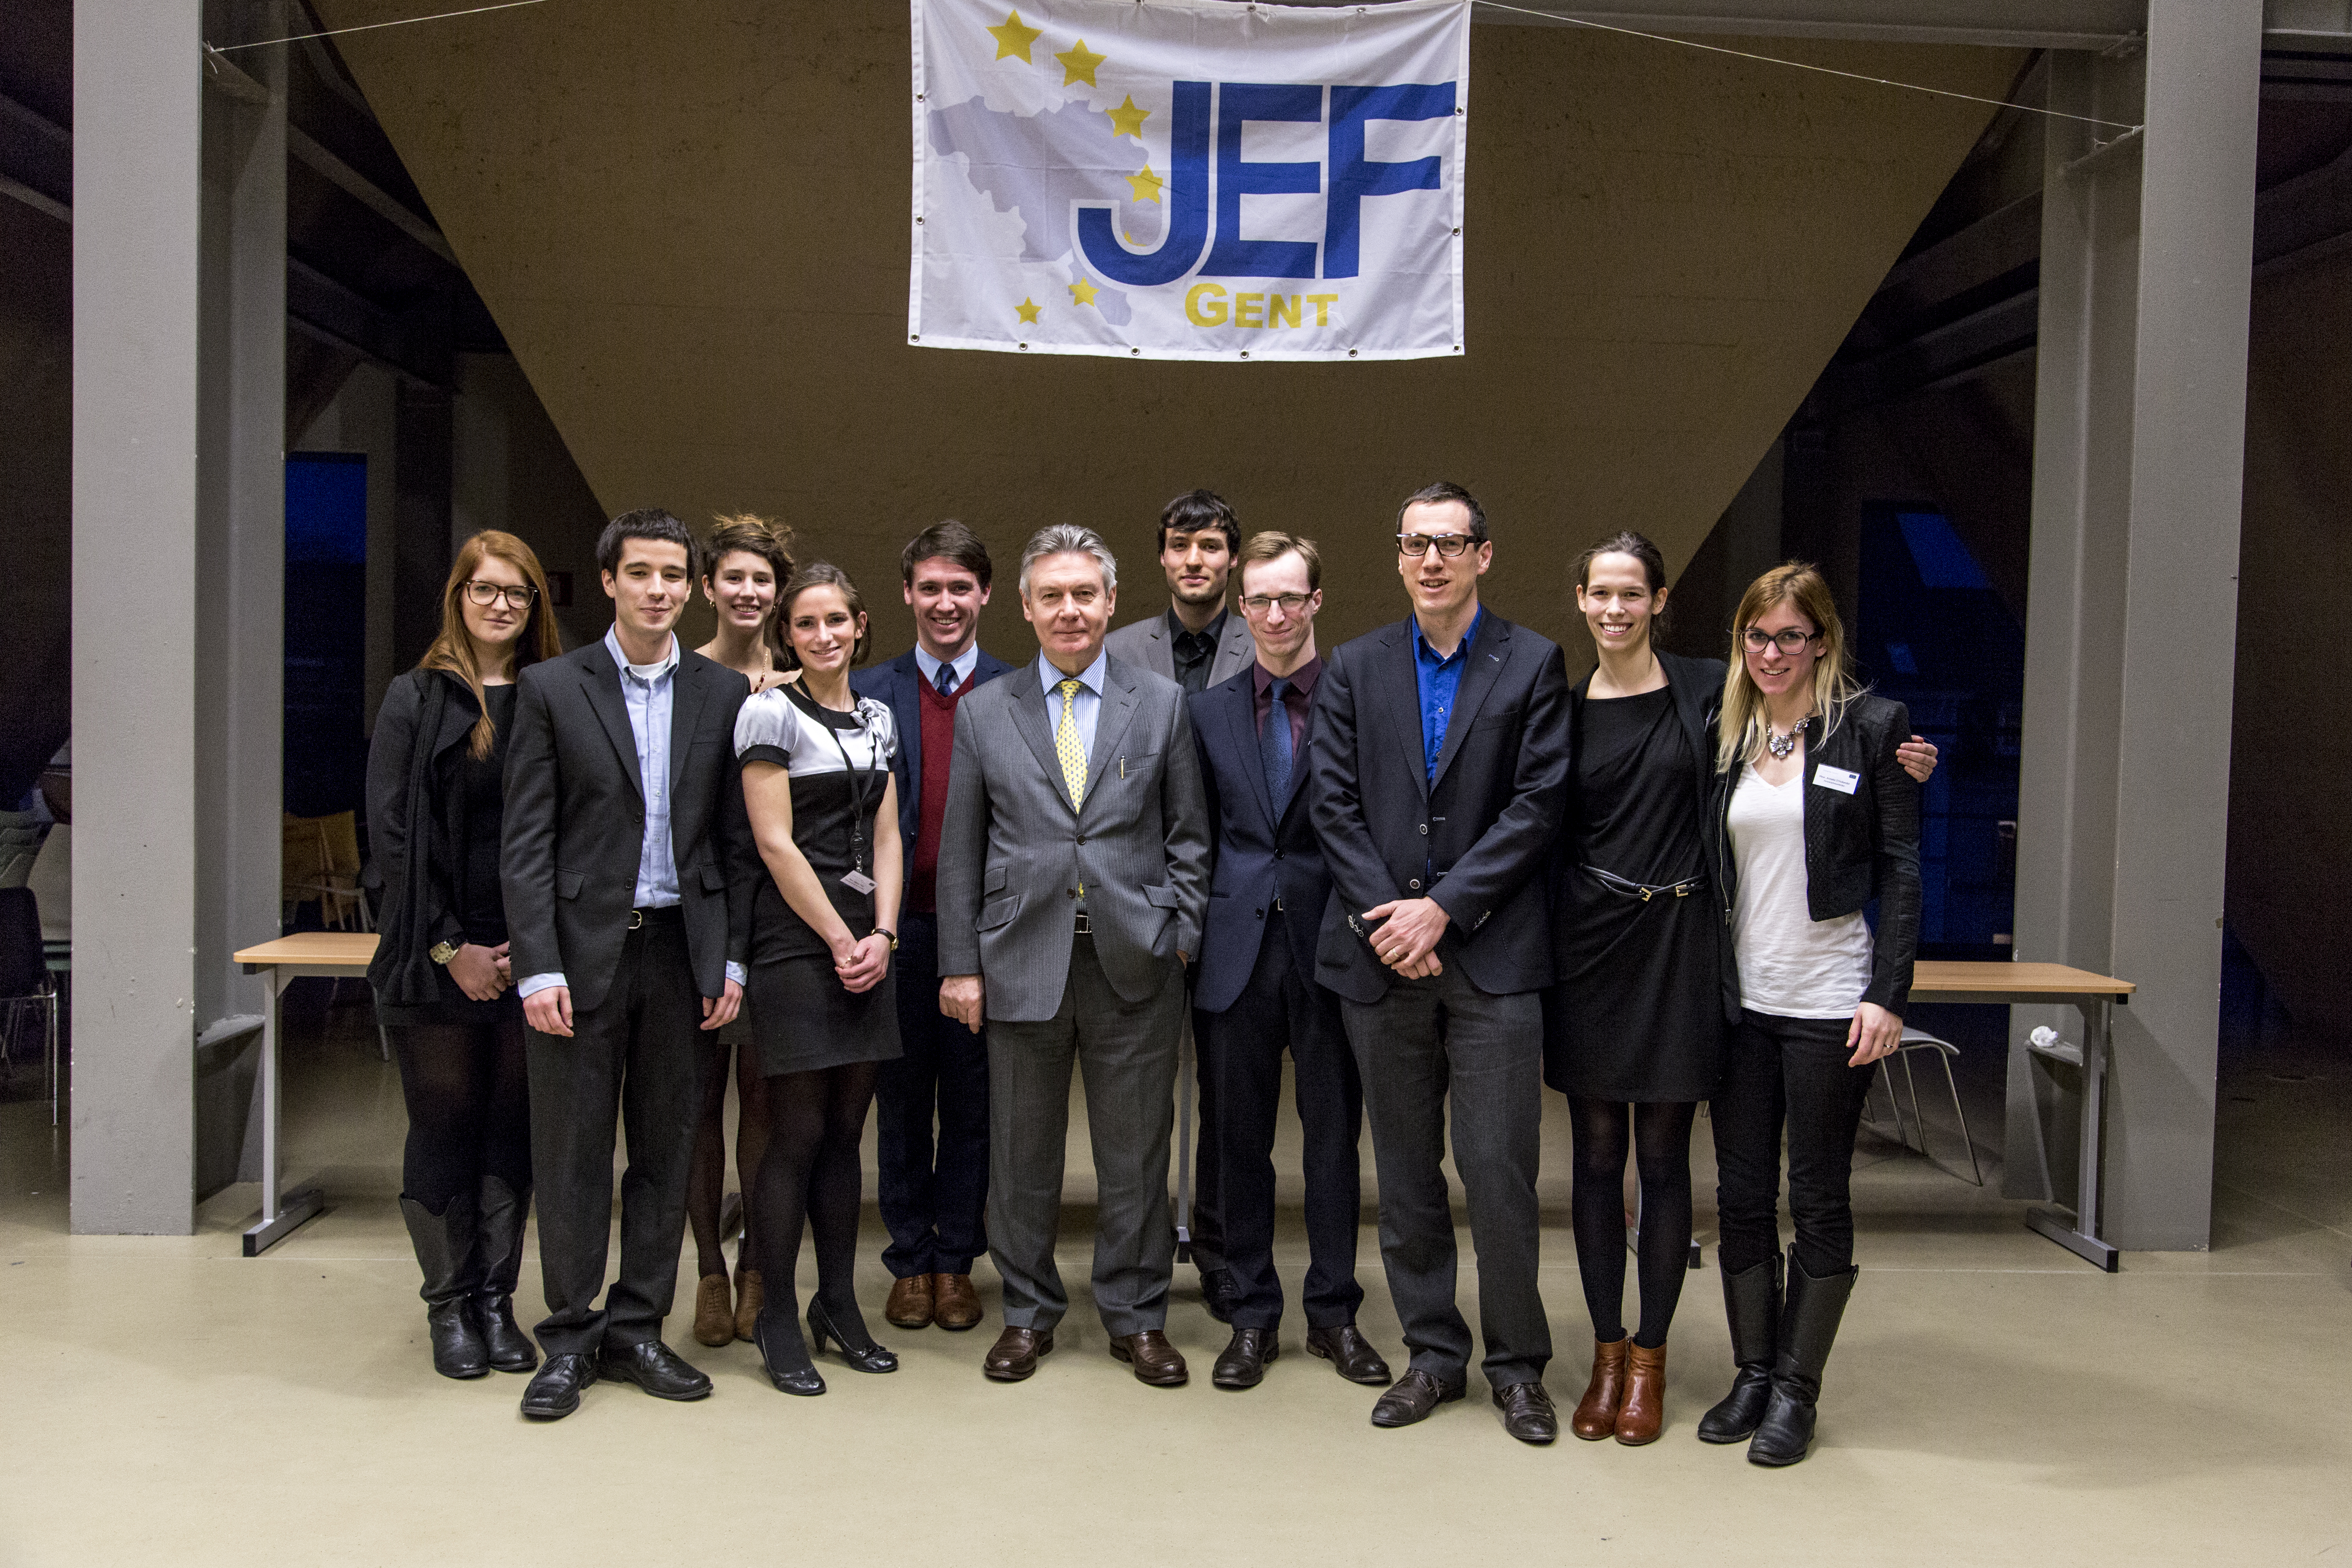 JEF Ghent board with guest speakers Karel De Gucht (center) and Pieter Verhelst (3rd from right)